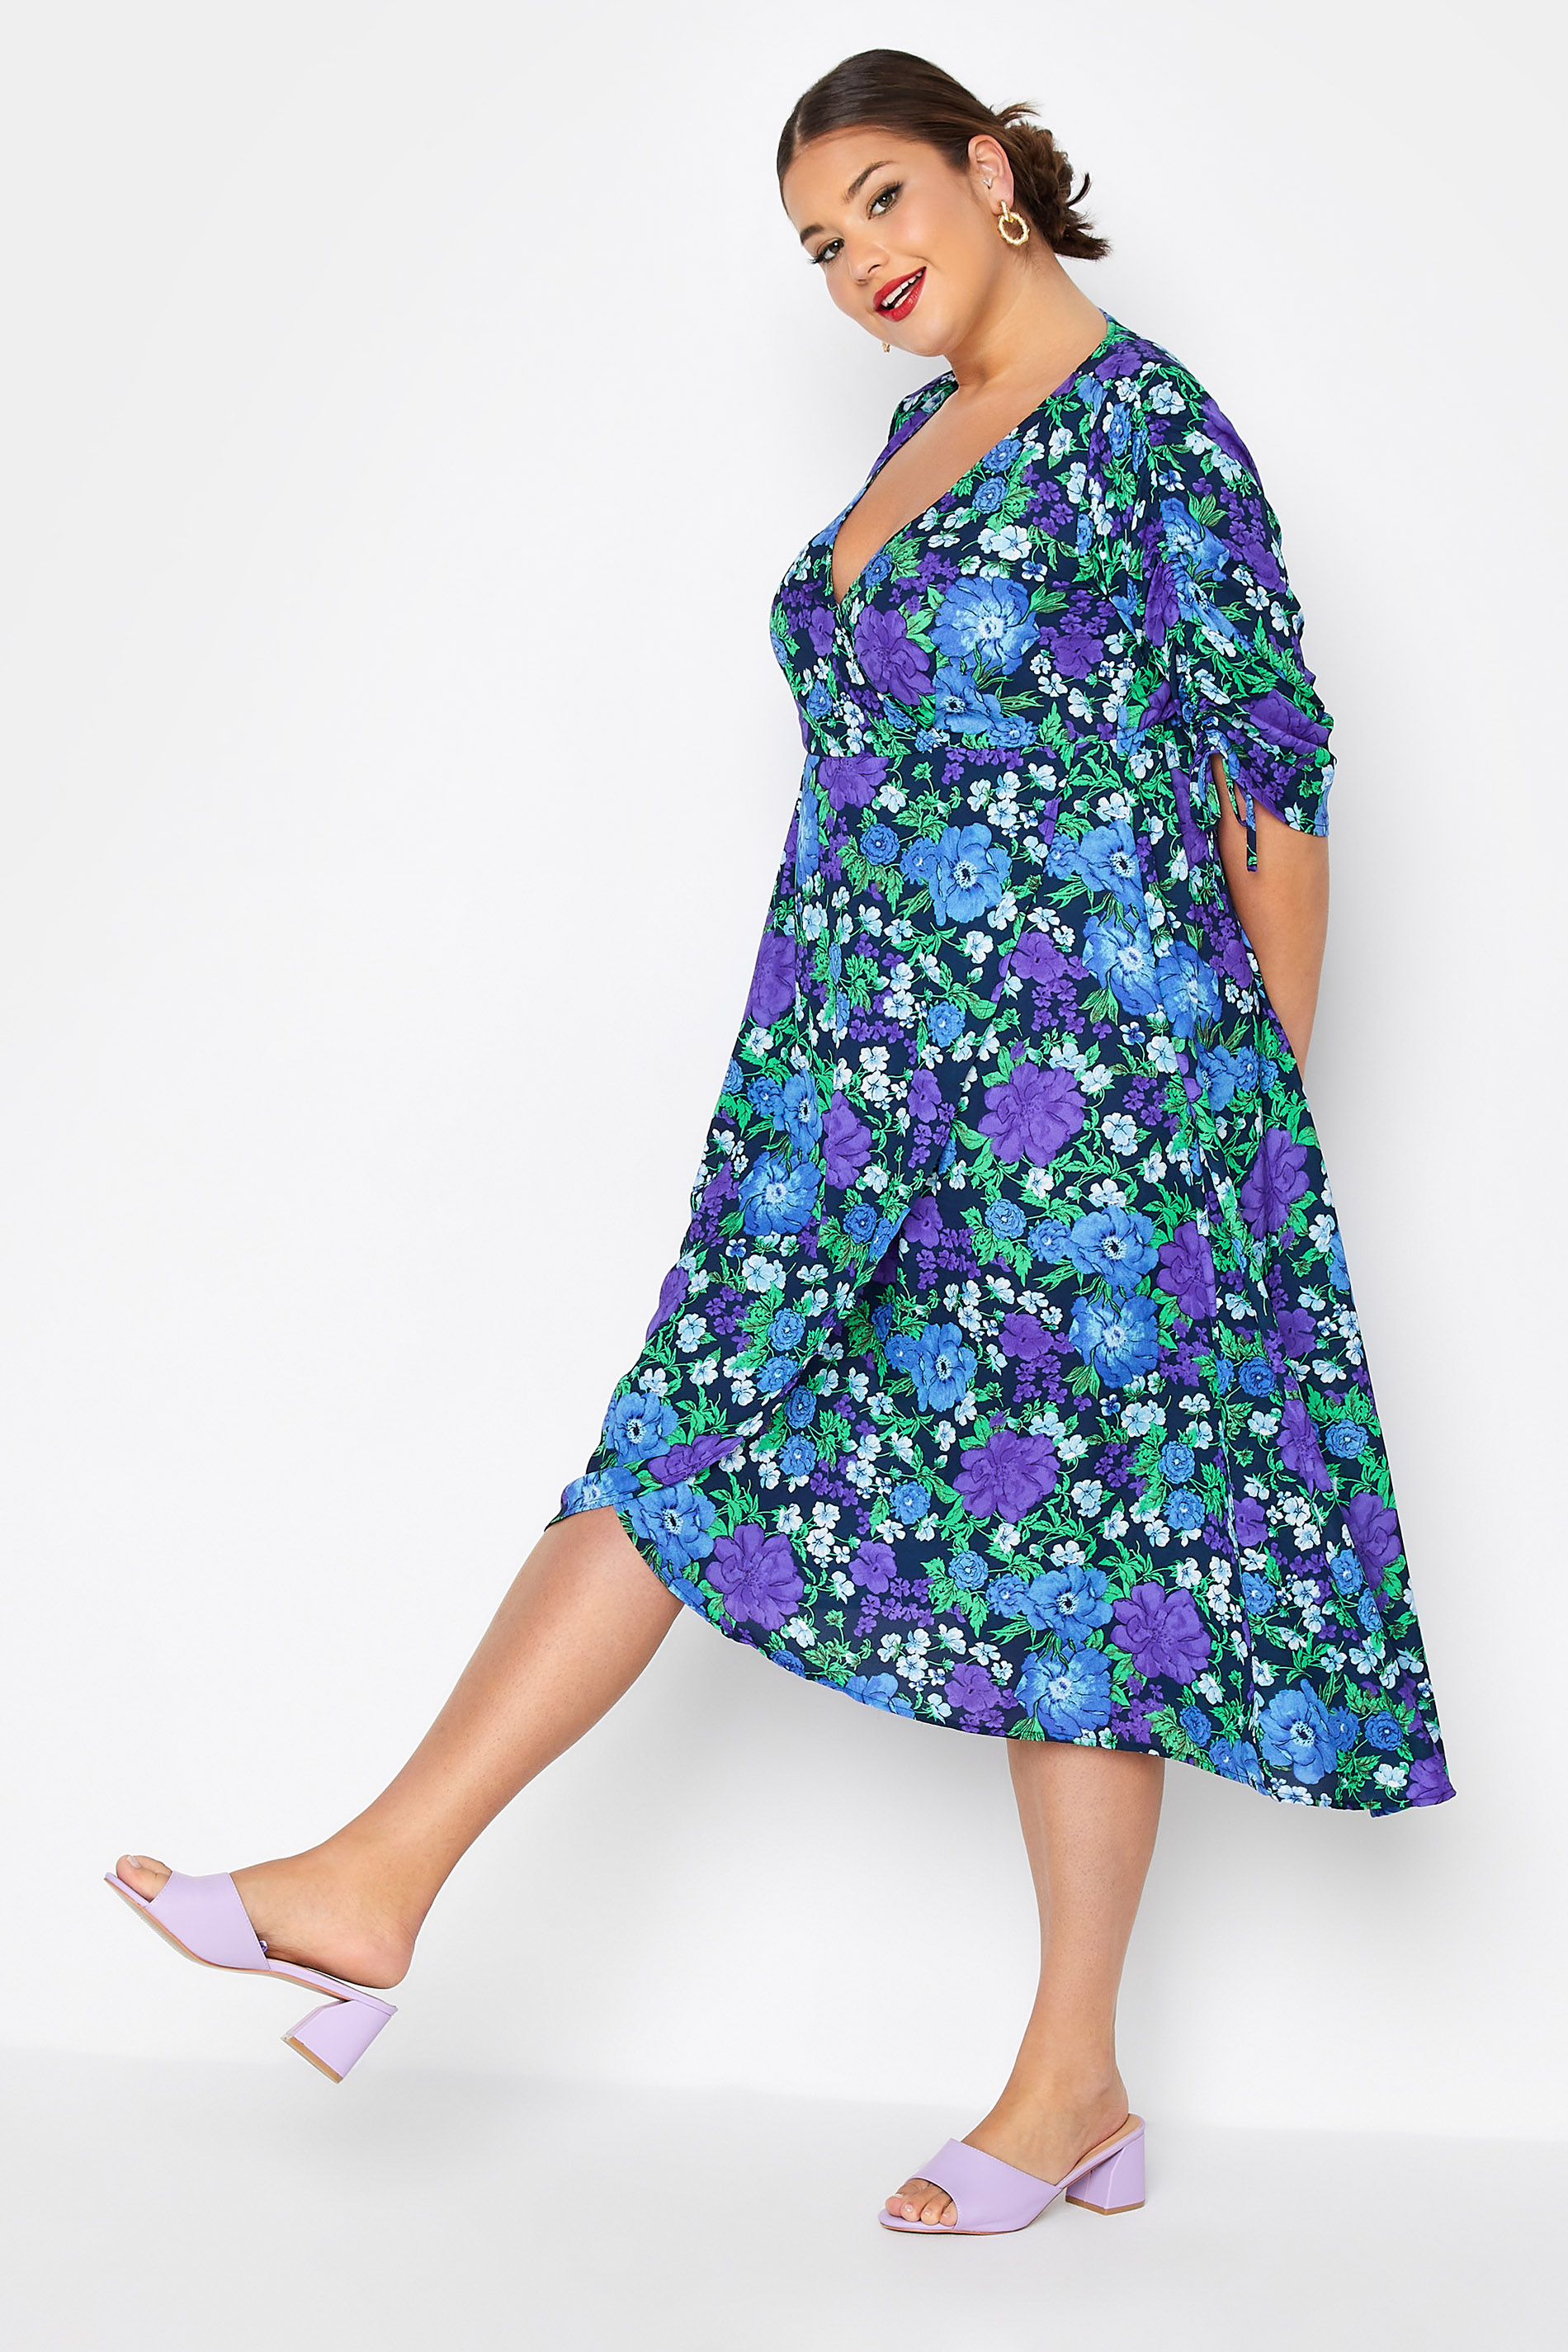 Robes Grande Taille Grande taille  Robes Portefeuilles | LIMITED COLLECTION - Robe Cache-Coeur Floral Bleu & Violet - LN46875